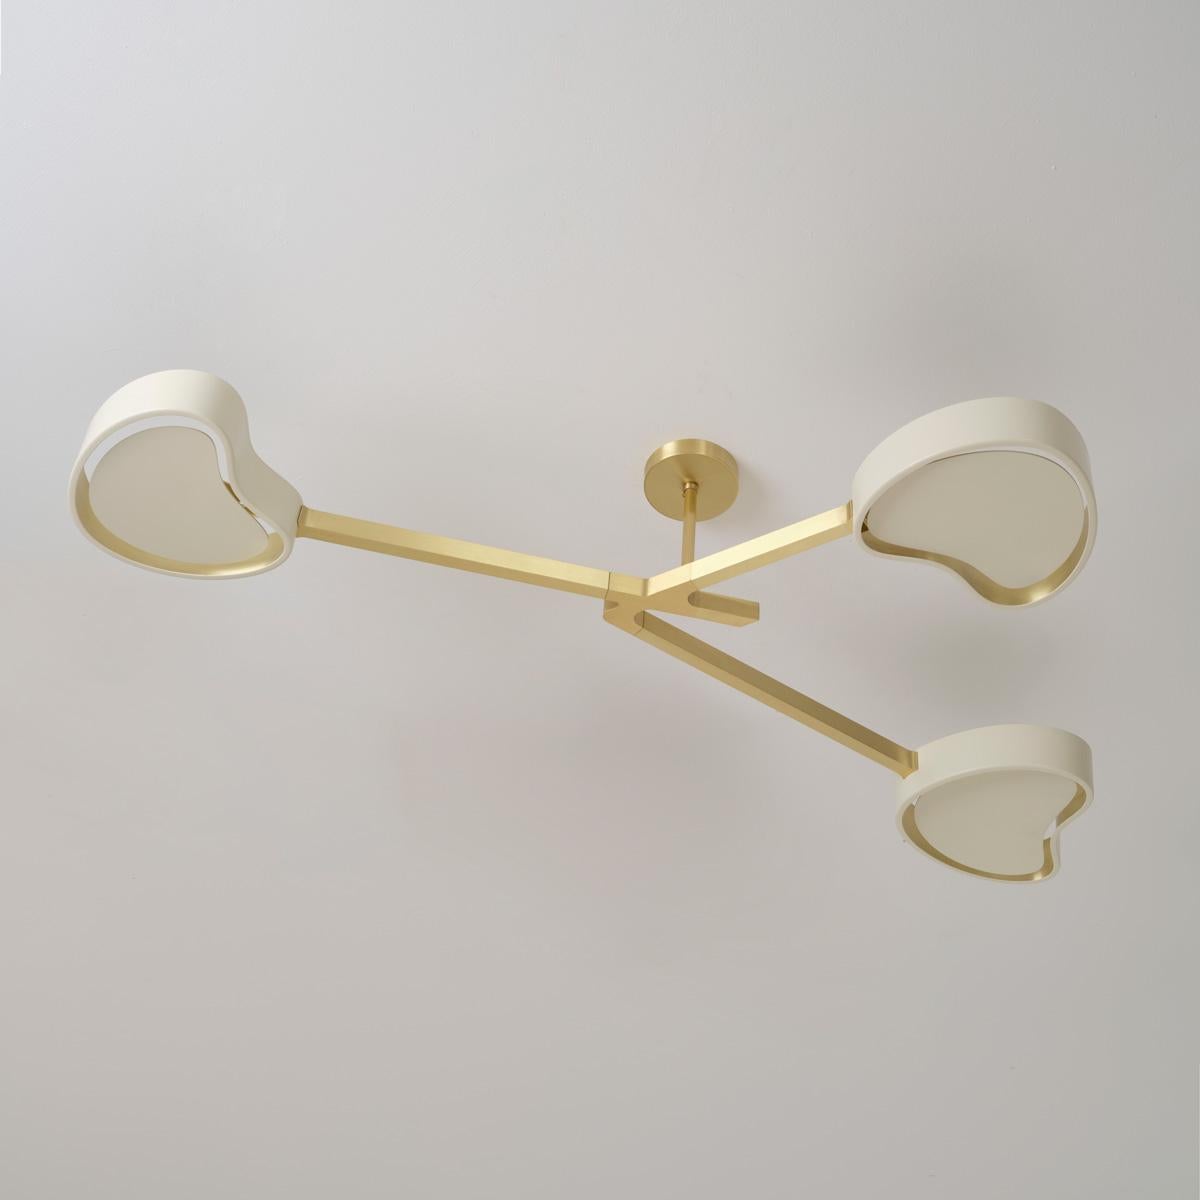 Contemporary Cuore N.3 Ceiling Light by Gaspare Asaro. Peltro and Bronze Finish For Sale